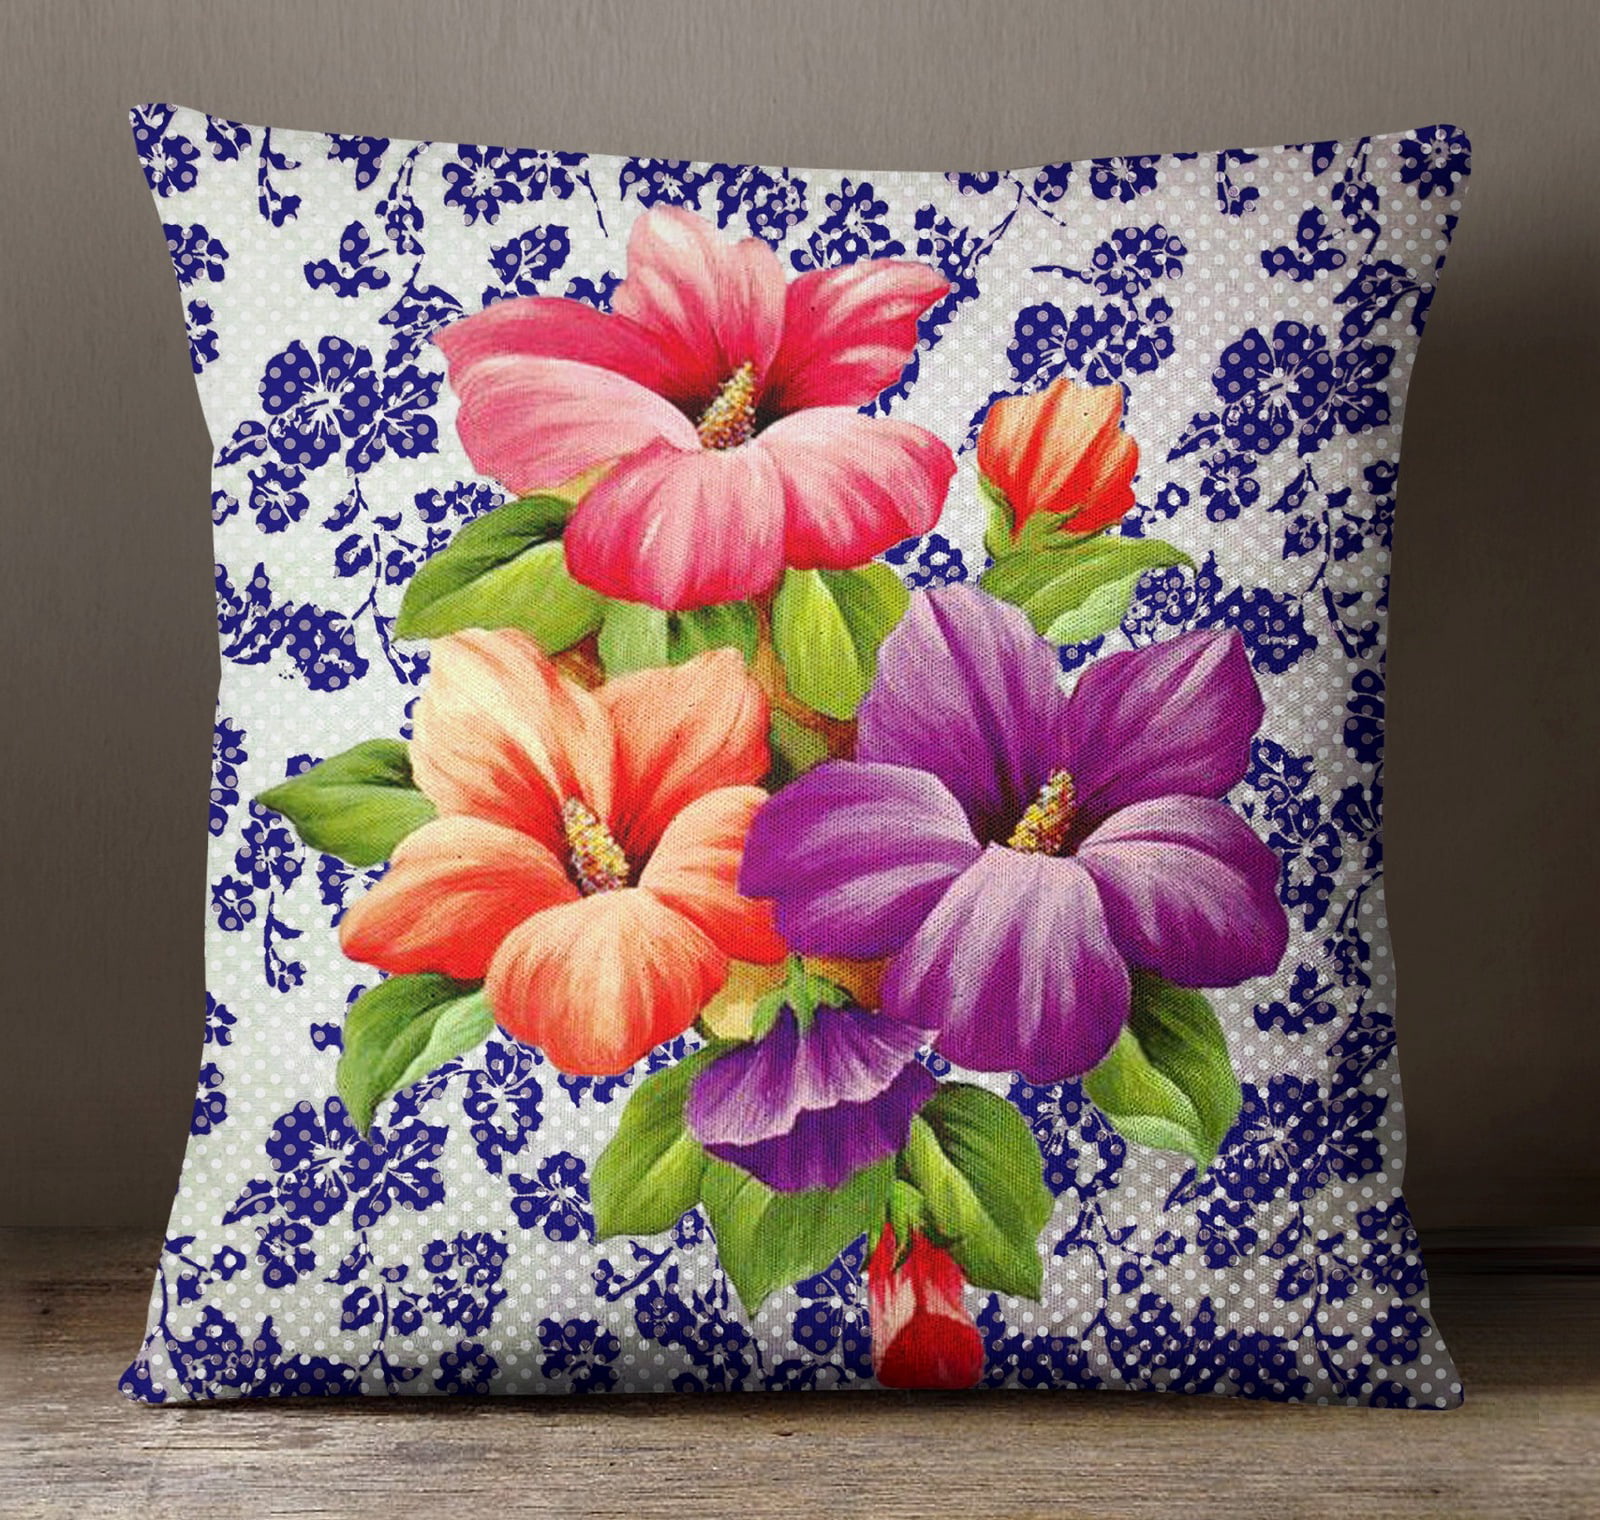 S4Sassy Floral Print Mint Cushion Cover Decorative Throw Pillow Case